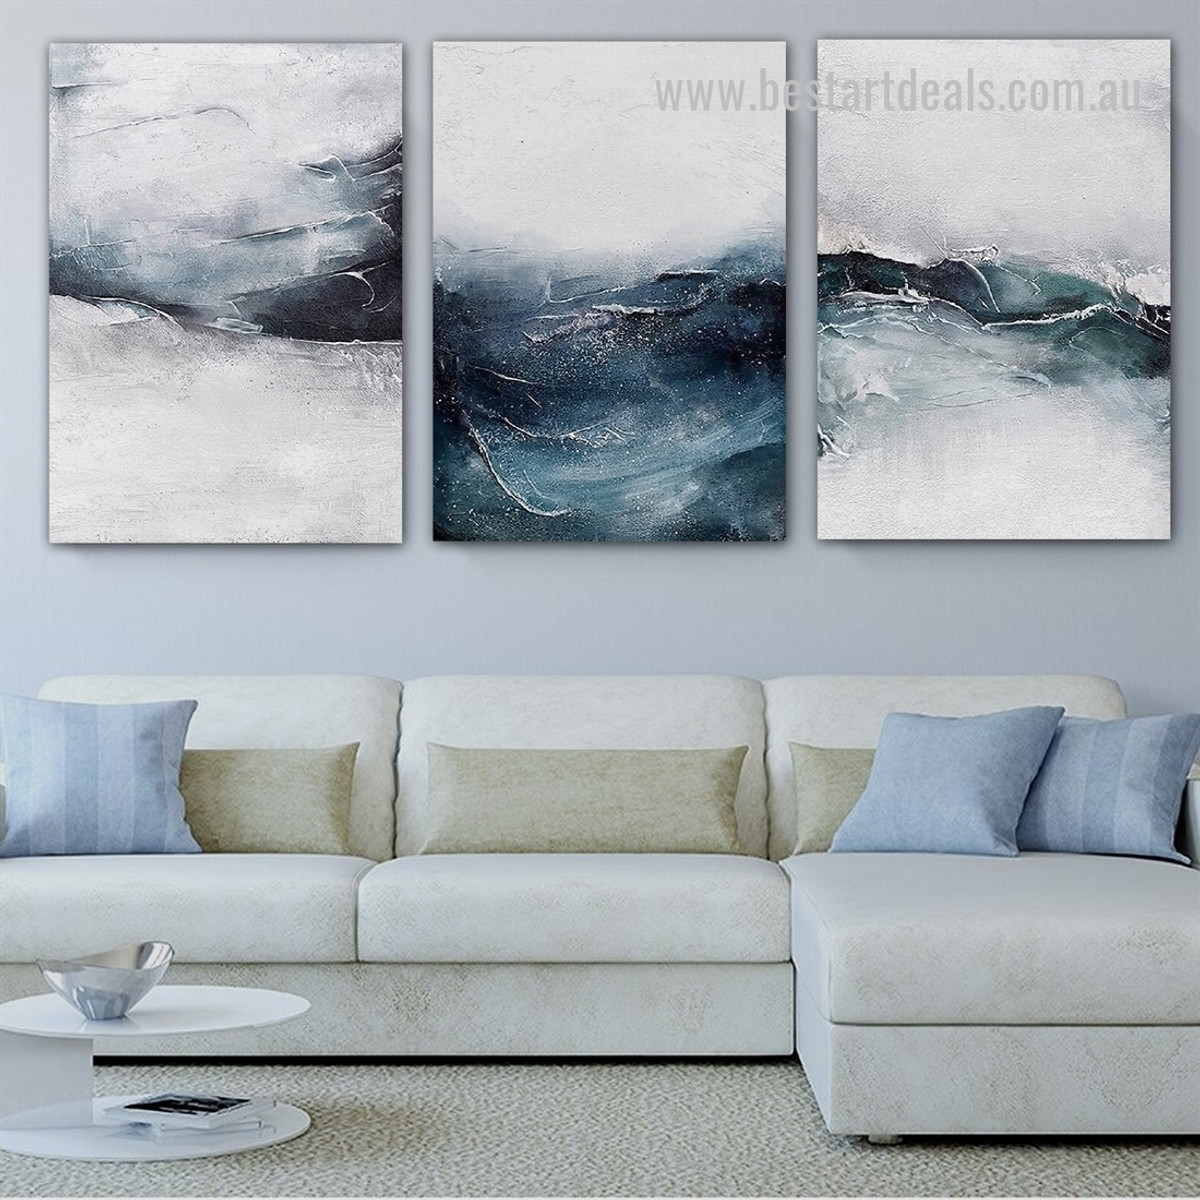 Ocean Whims Sea Waves Modern Canvas Wall Art 3 Piece Framed Stretched Abstract Seascape Print Image for Home Outfit